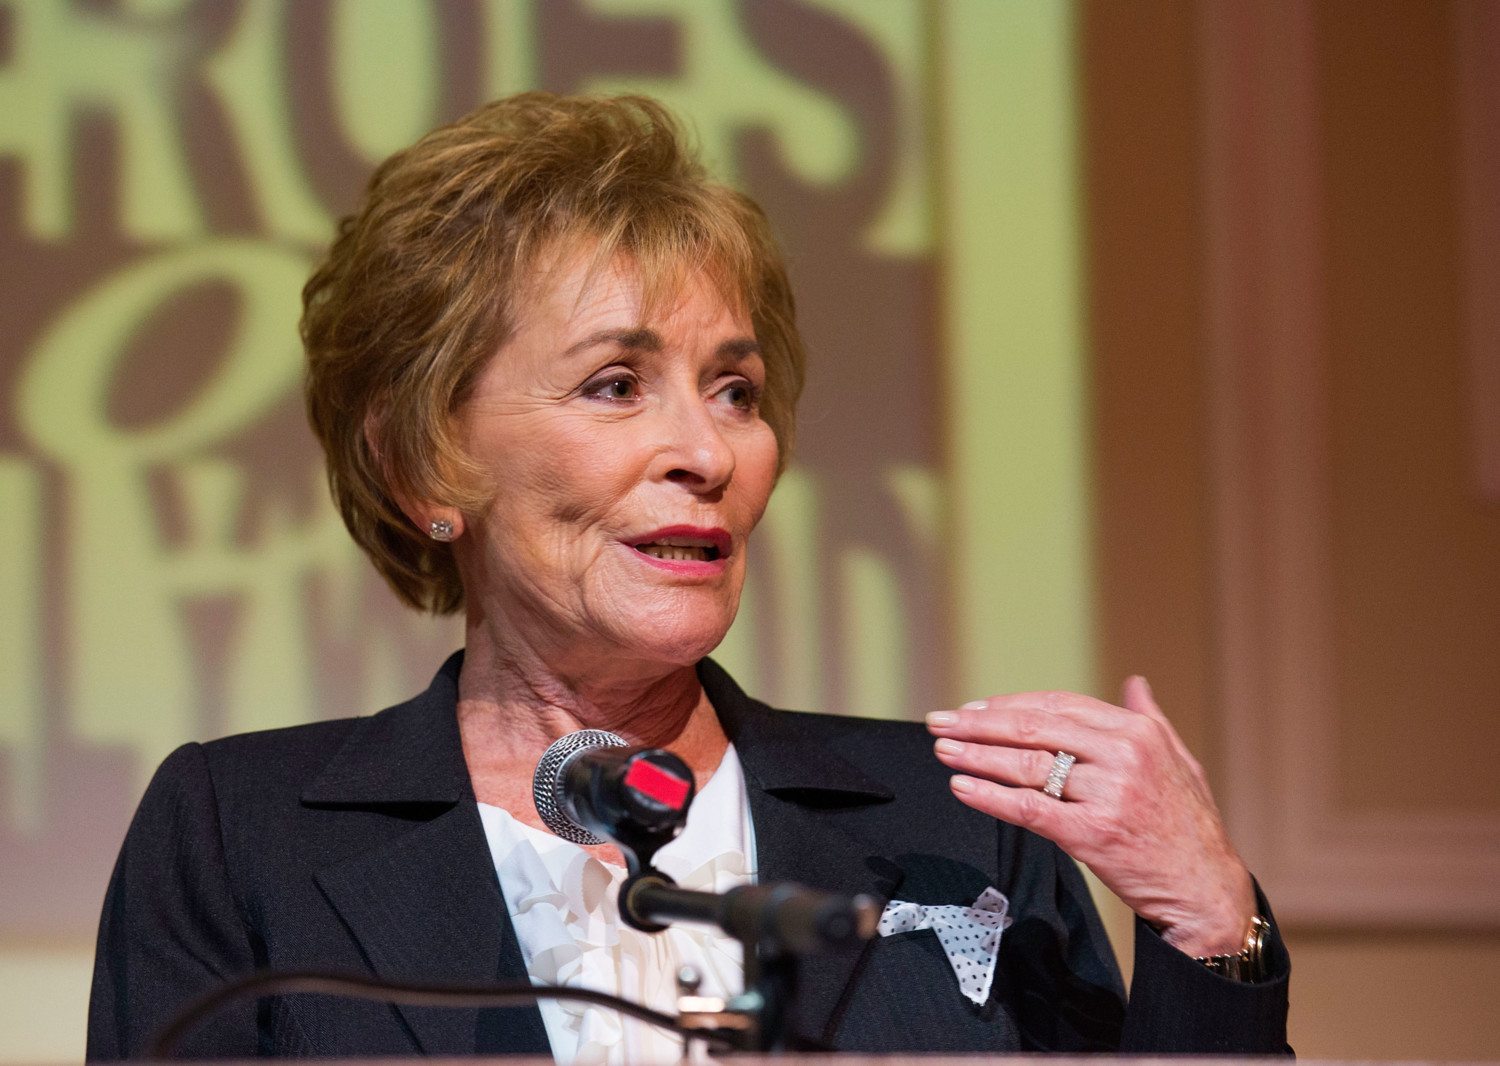 Judge Judy will end after 25 seasons, making way for 